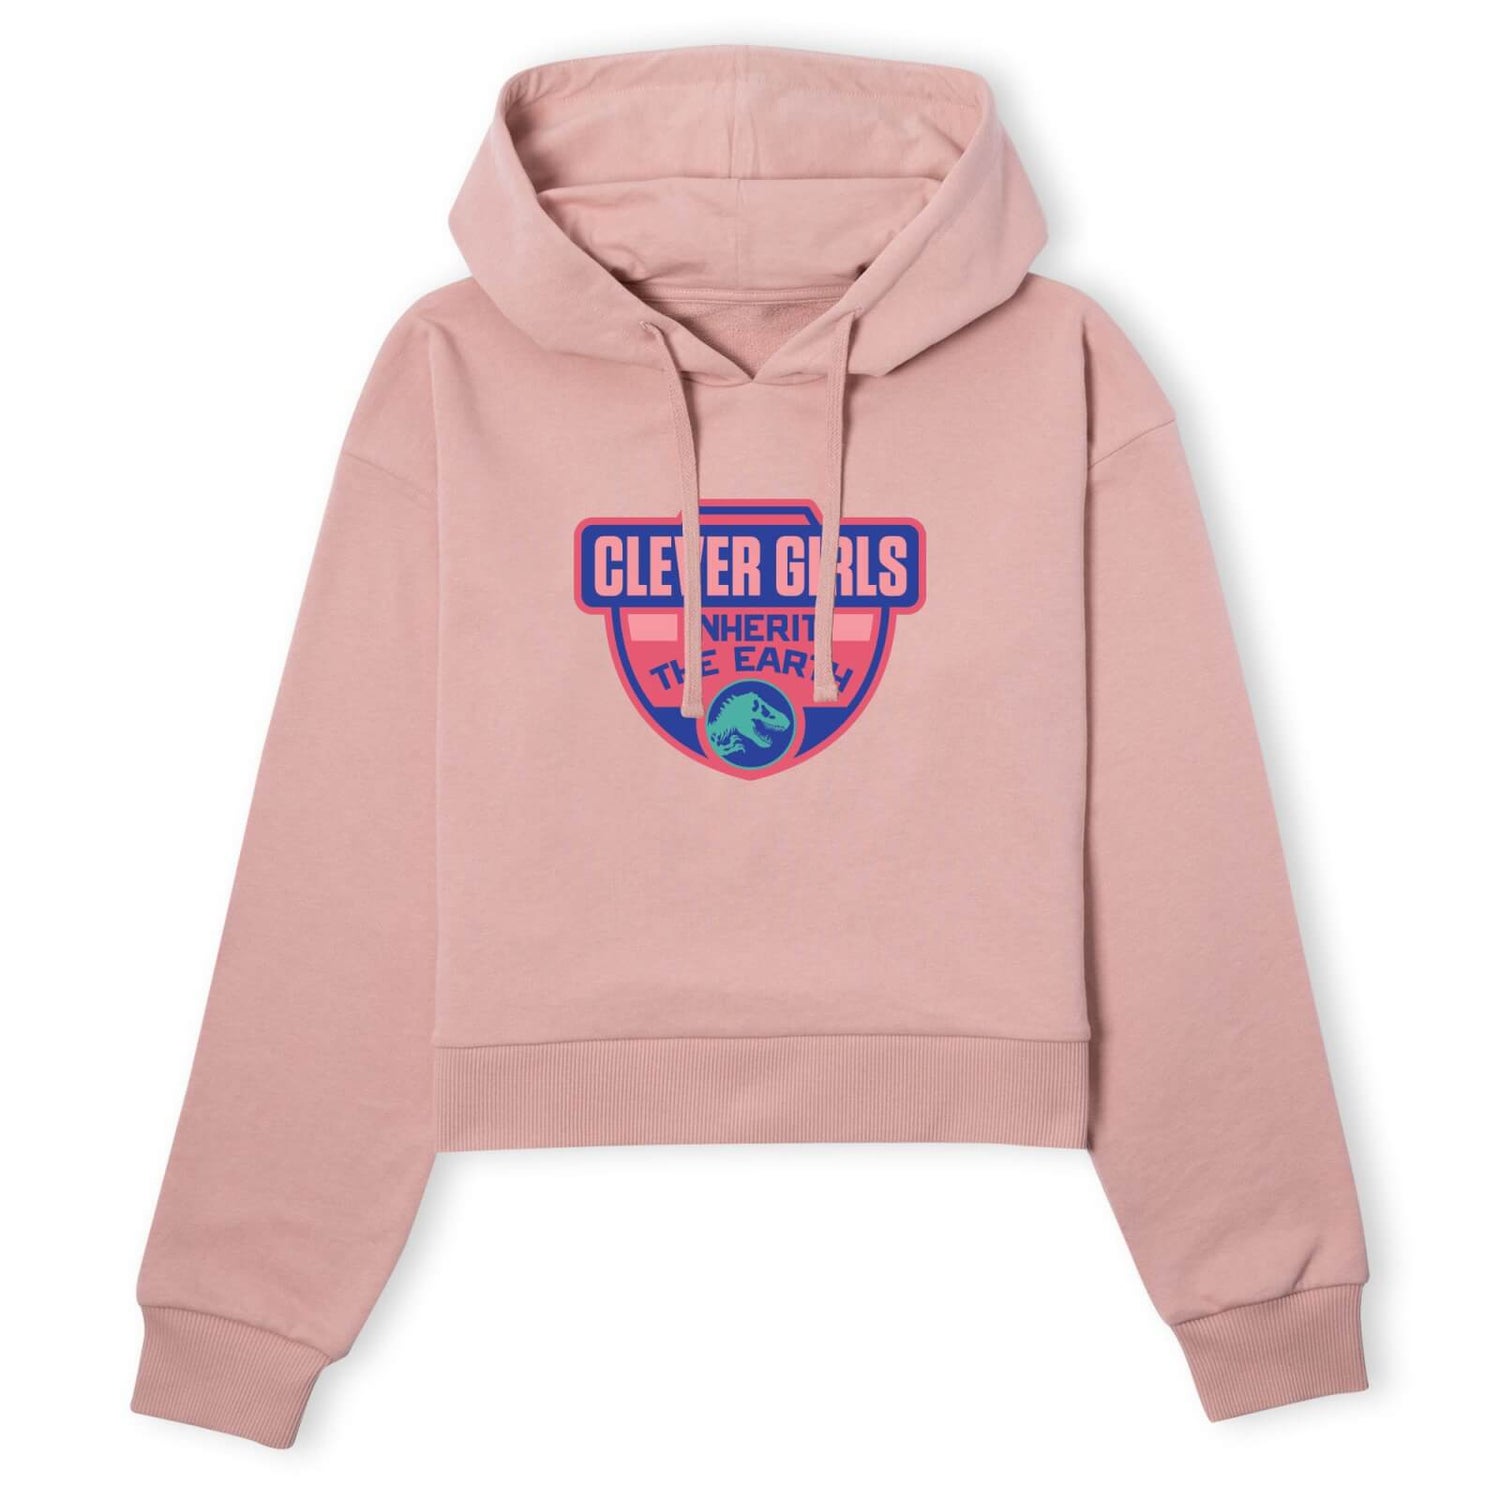 Jurassic Park Clever Girls Inherit The Earth Women's Cropped Hoodie - Dusty Pink